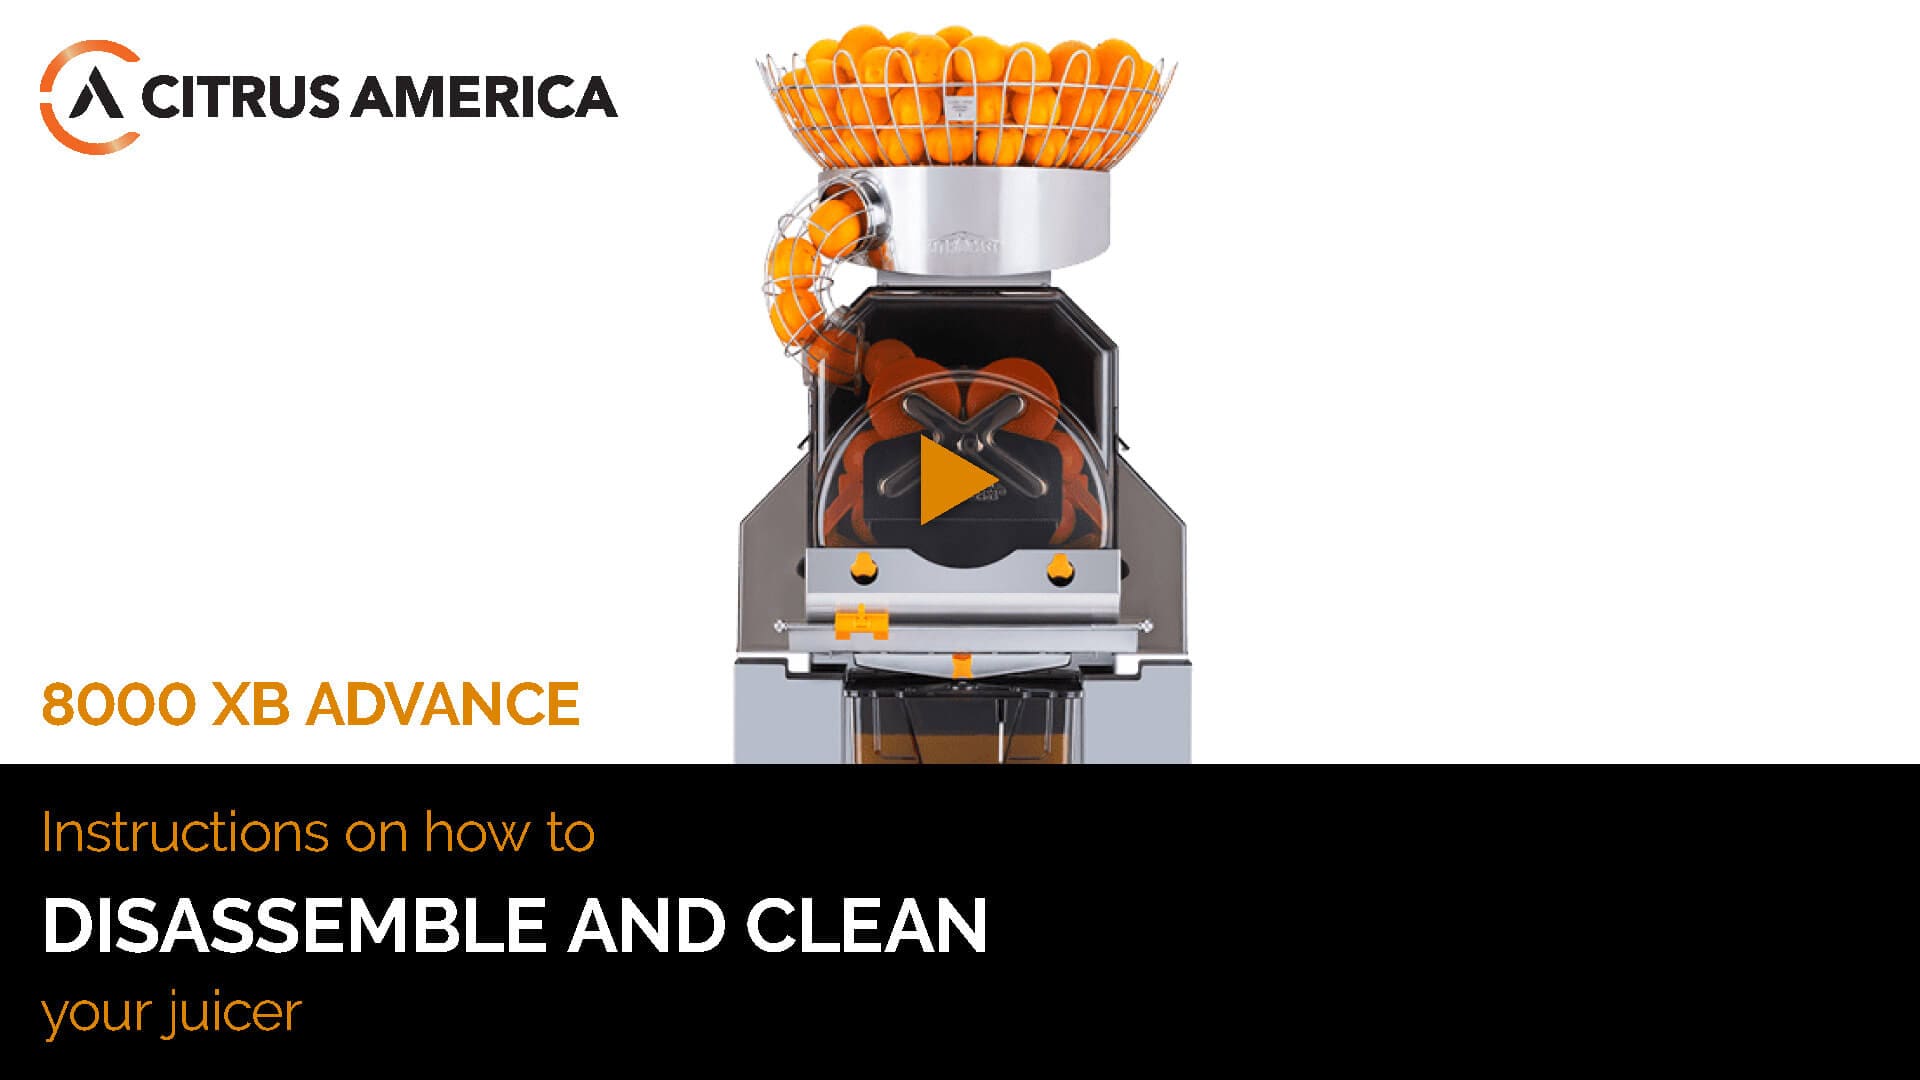 Image of the 8000 XB Advance juicer machine by Citrus America. The juicer, topped with a tray filled with oranges, showcases its internal cutting and juicing mechanism. Text on the image states, "Training: Instructions on how to DISASSEMBLE AND CLEAN your juicer.